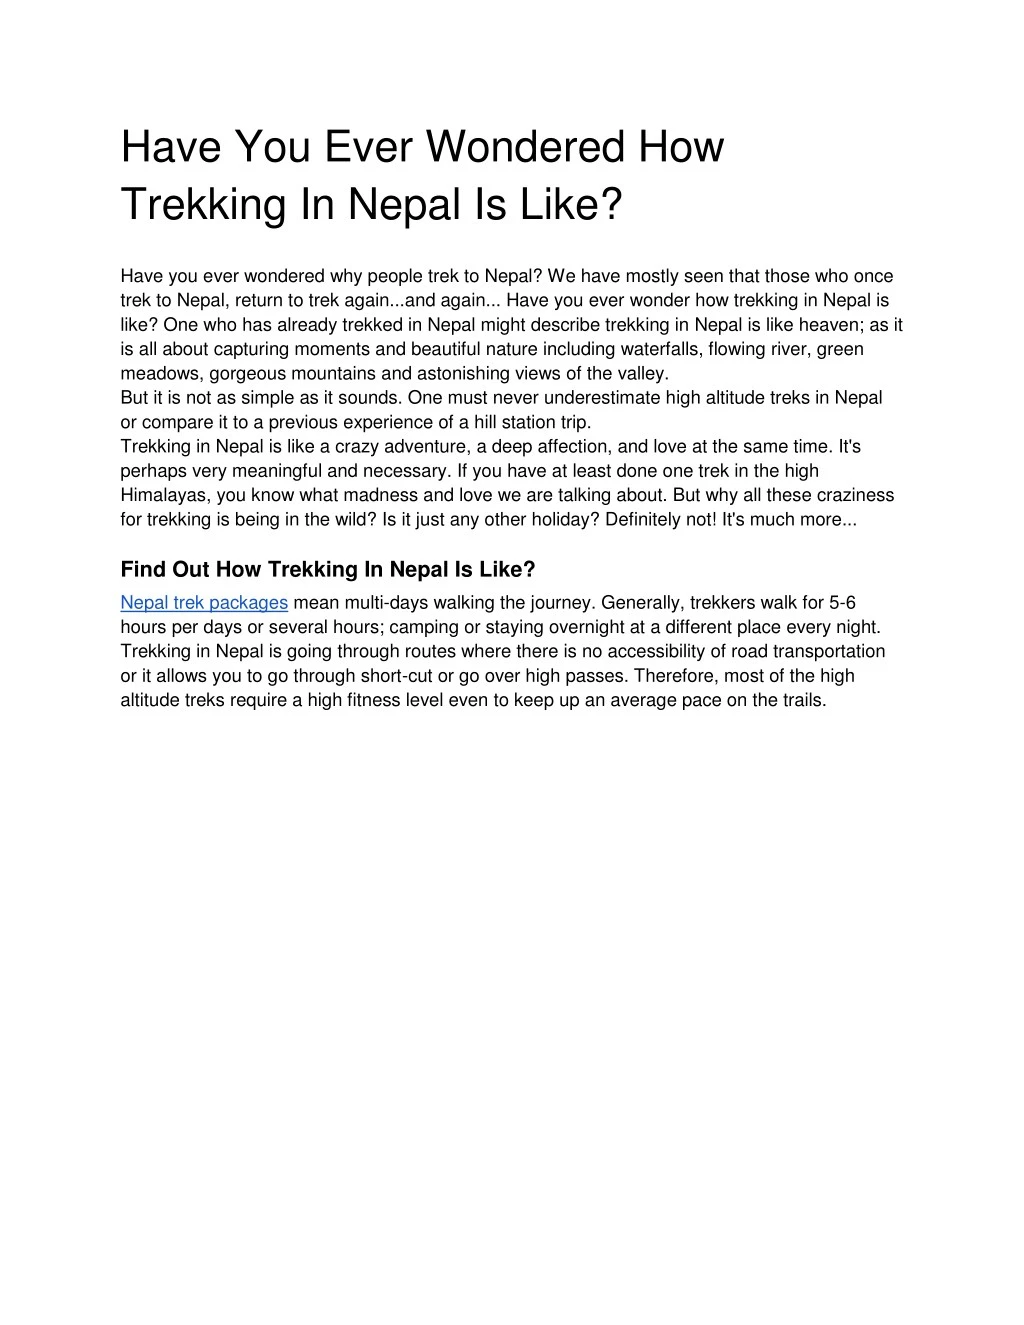 have you ever wondered how trekking in nepal